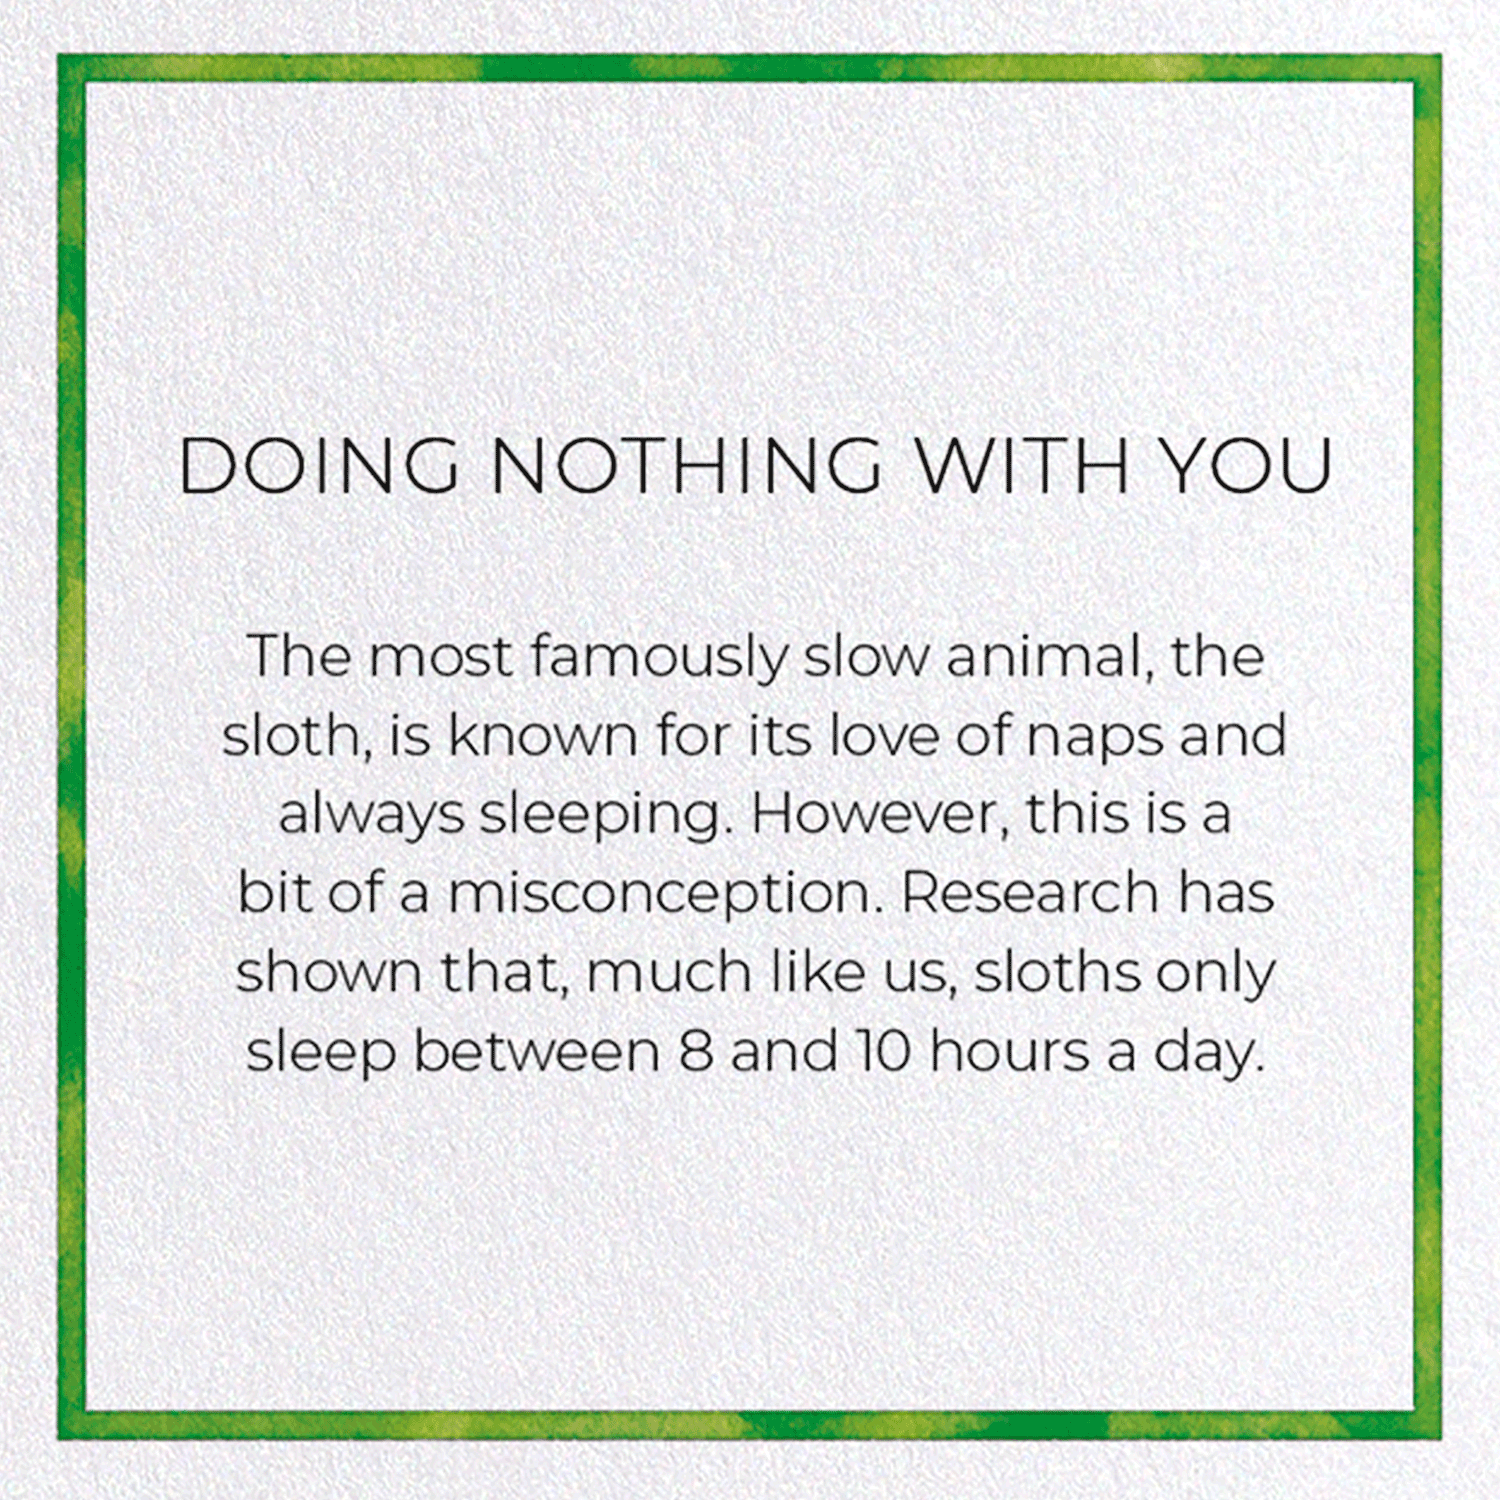 DOING NOTHING WITH YOU